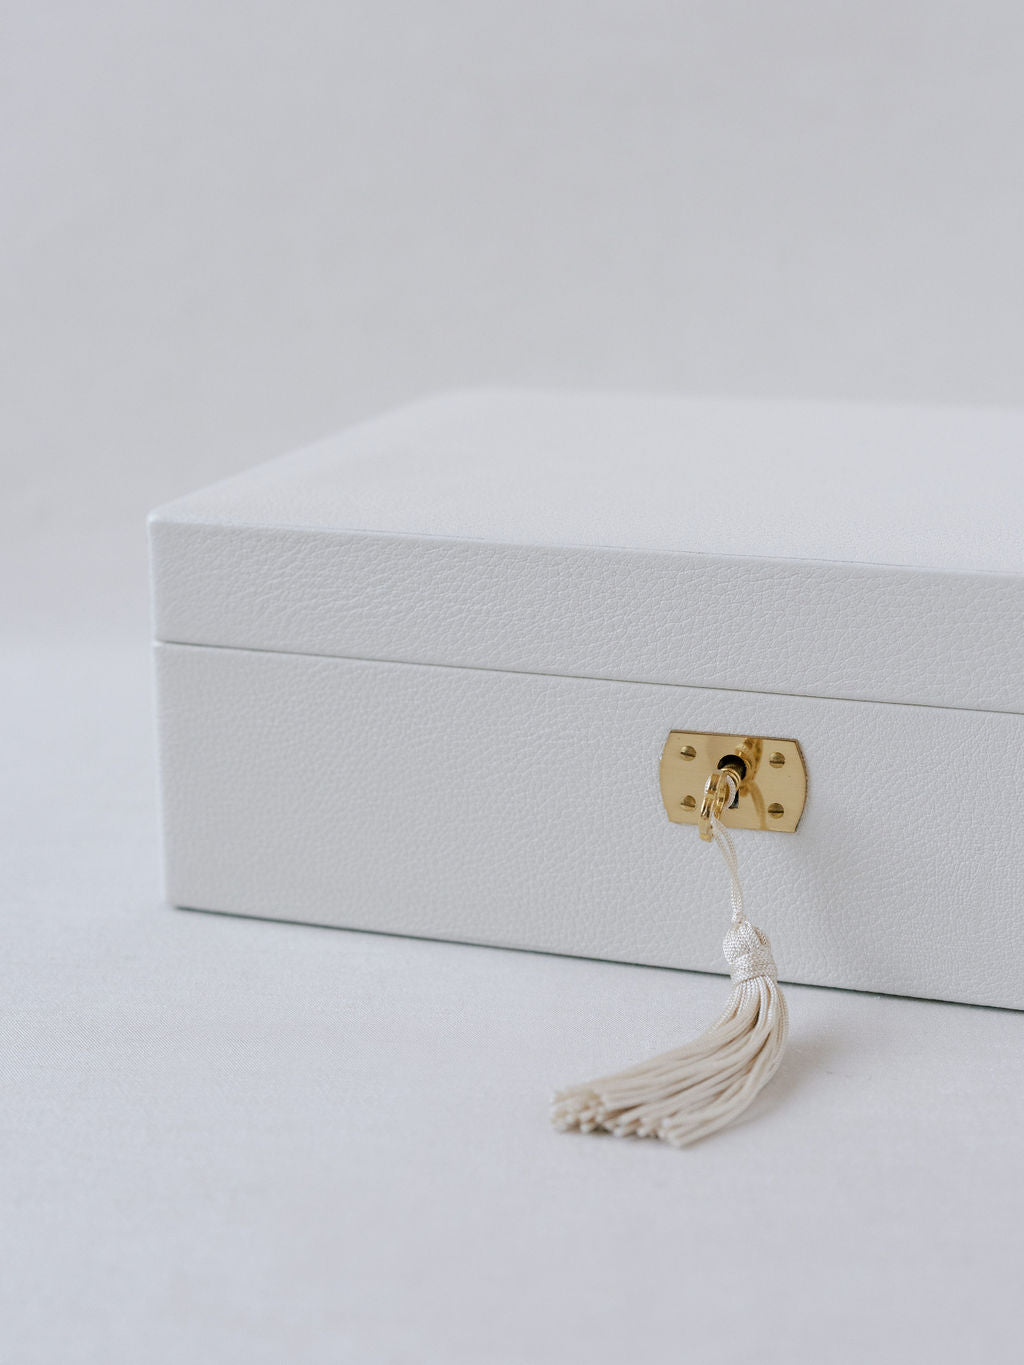 White Italian leather wedding day keepsake box shown closed with gold key with white tassel inserted into a key lock. 